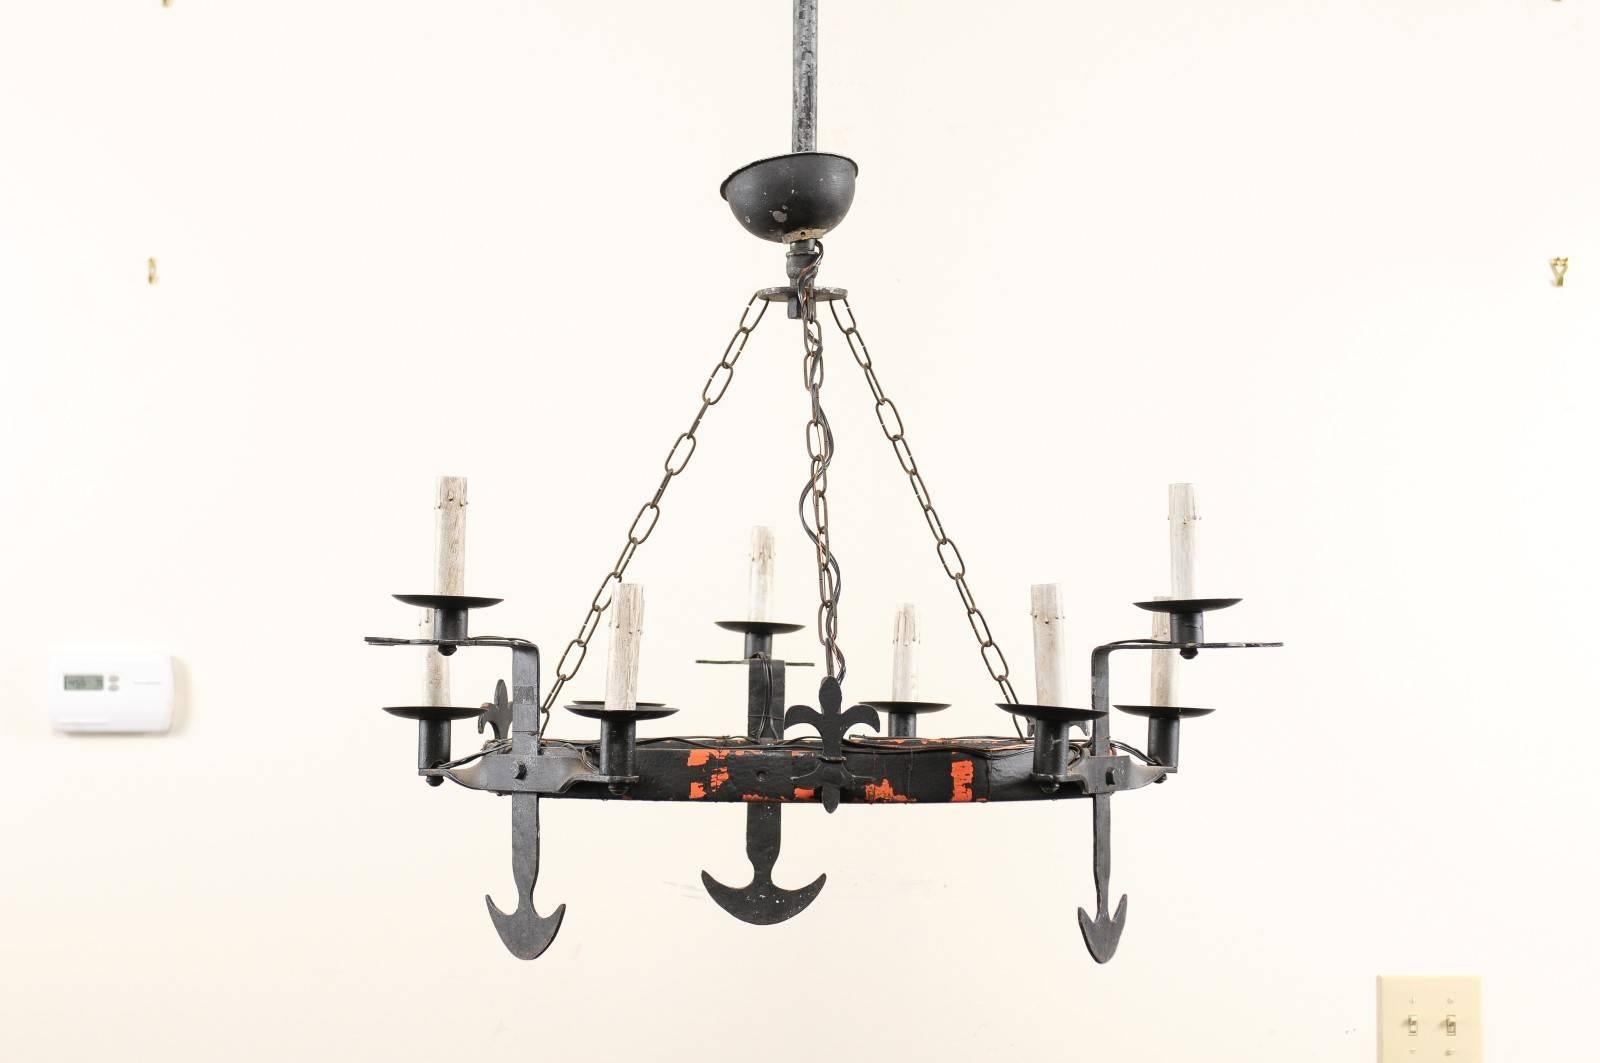 A French ring-shaped iron chandelier from the mid-20th century. This French forged iron circular-shaped chandelier features a central ring which is adorn with a fleur-di-lis motif about it's perimeter. The iron light arms have nice spade-like motifs